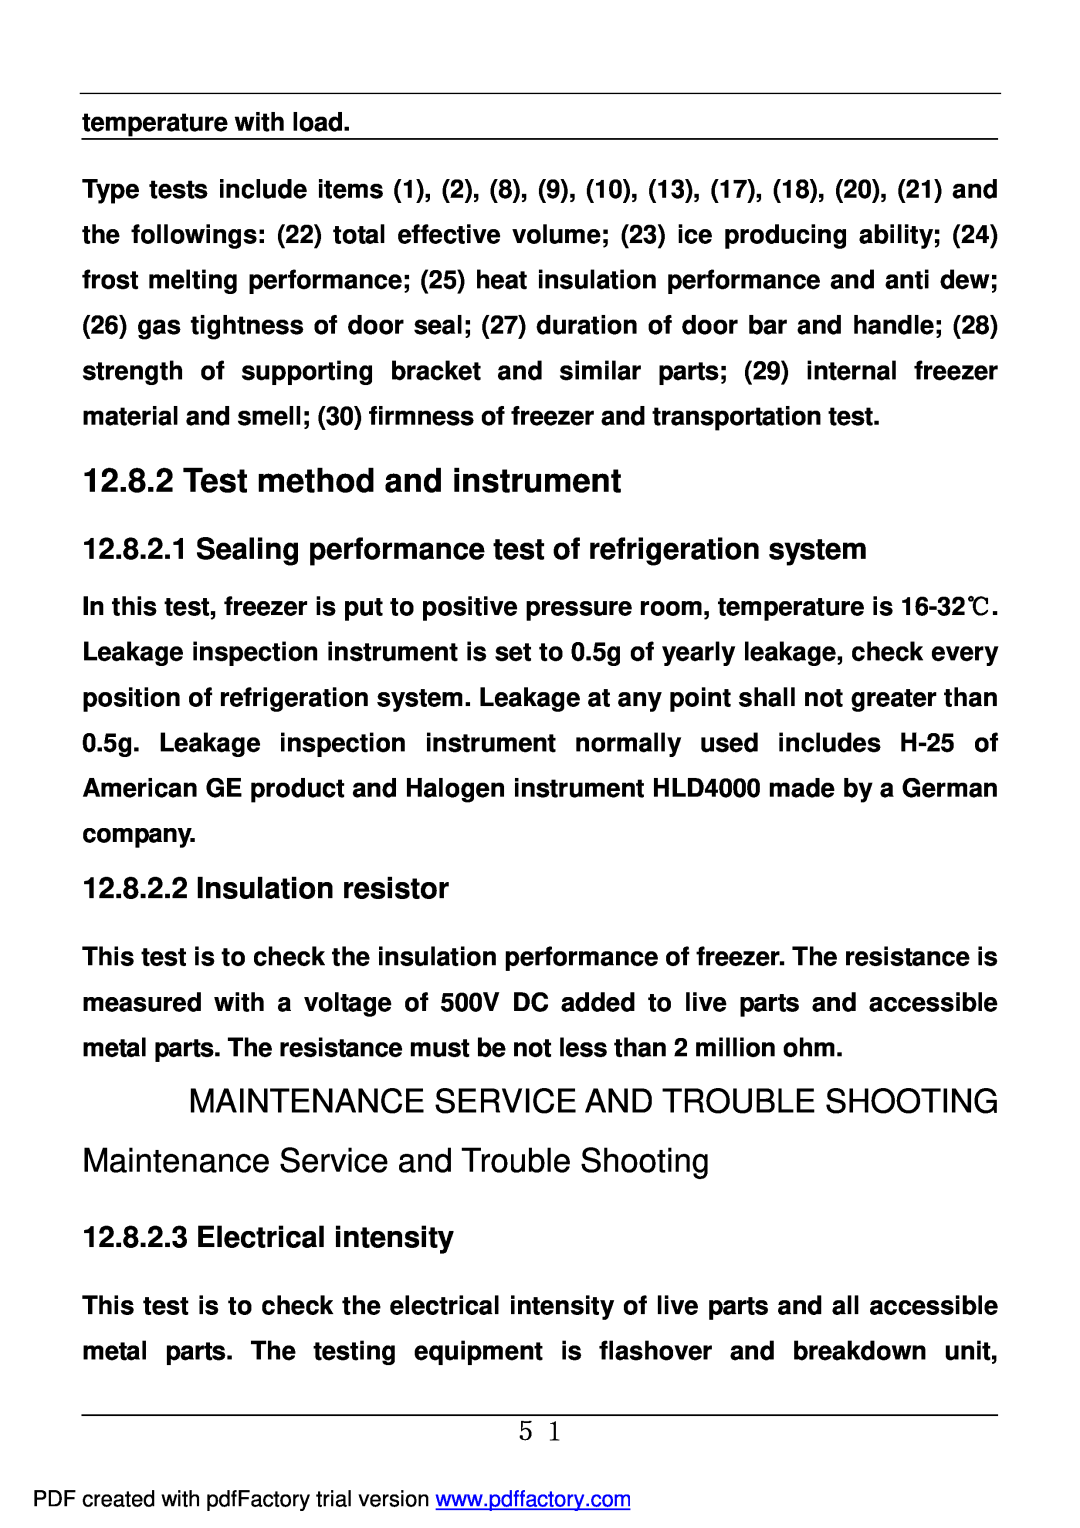 Haier BD-478A service manual Test method and instrument, Maintenance Service And Trouble Shooting, Insulation resistor 